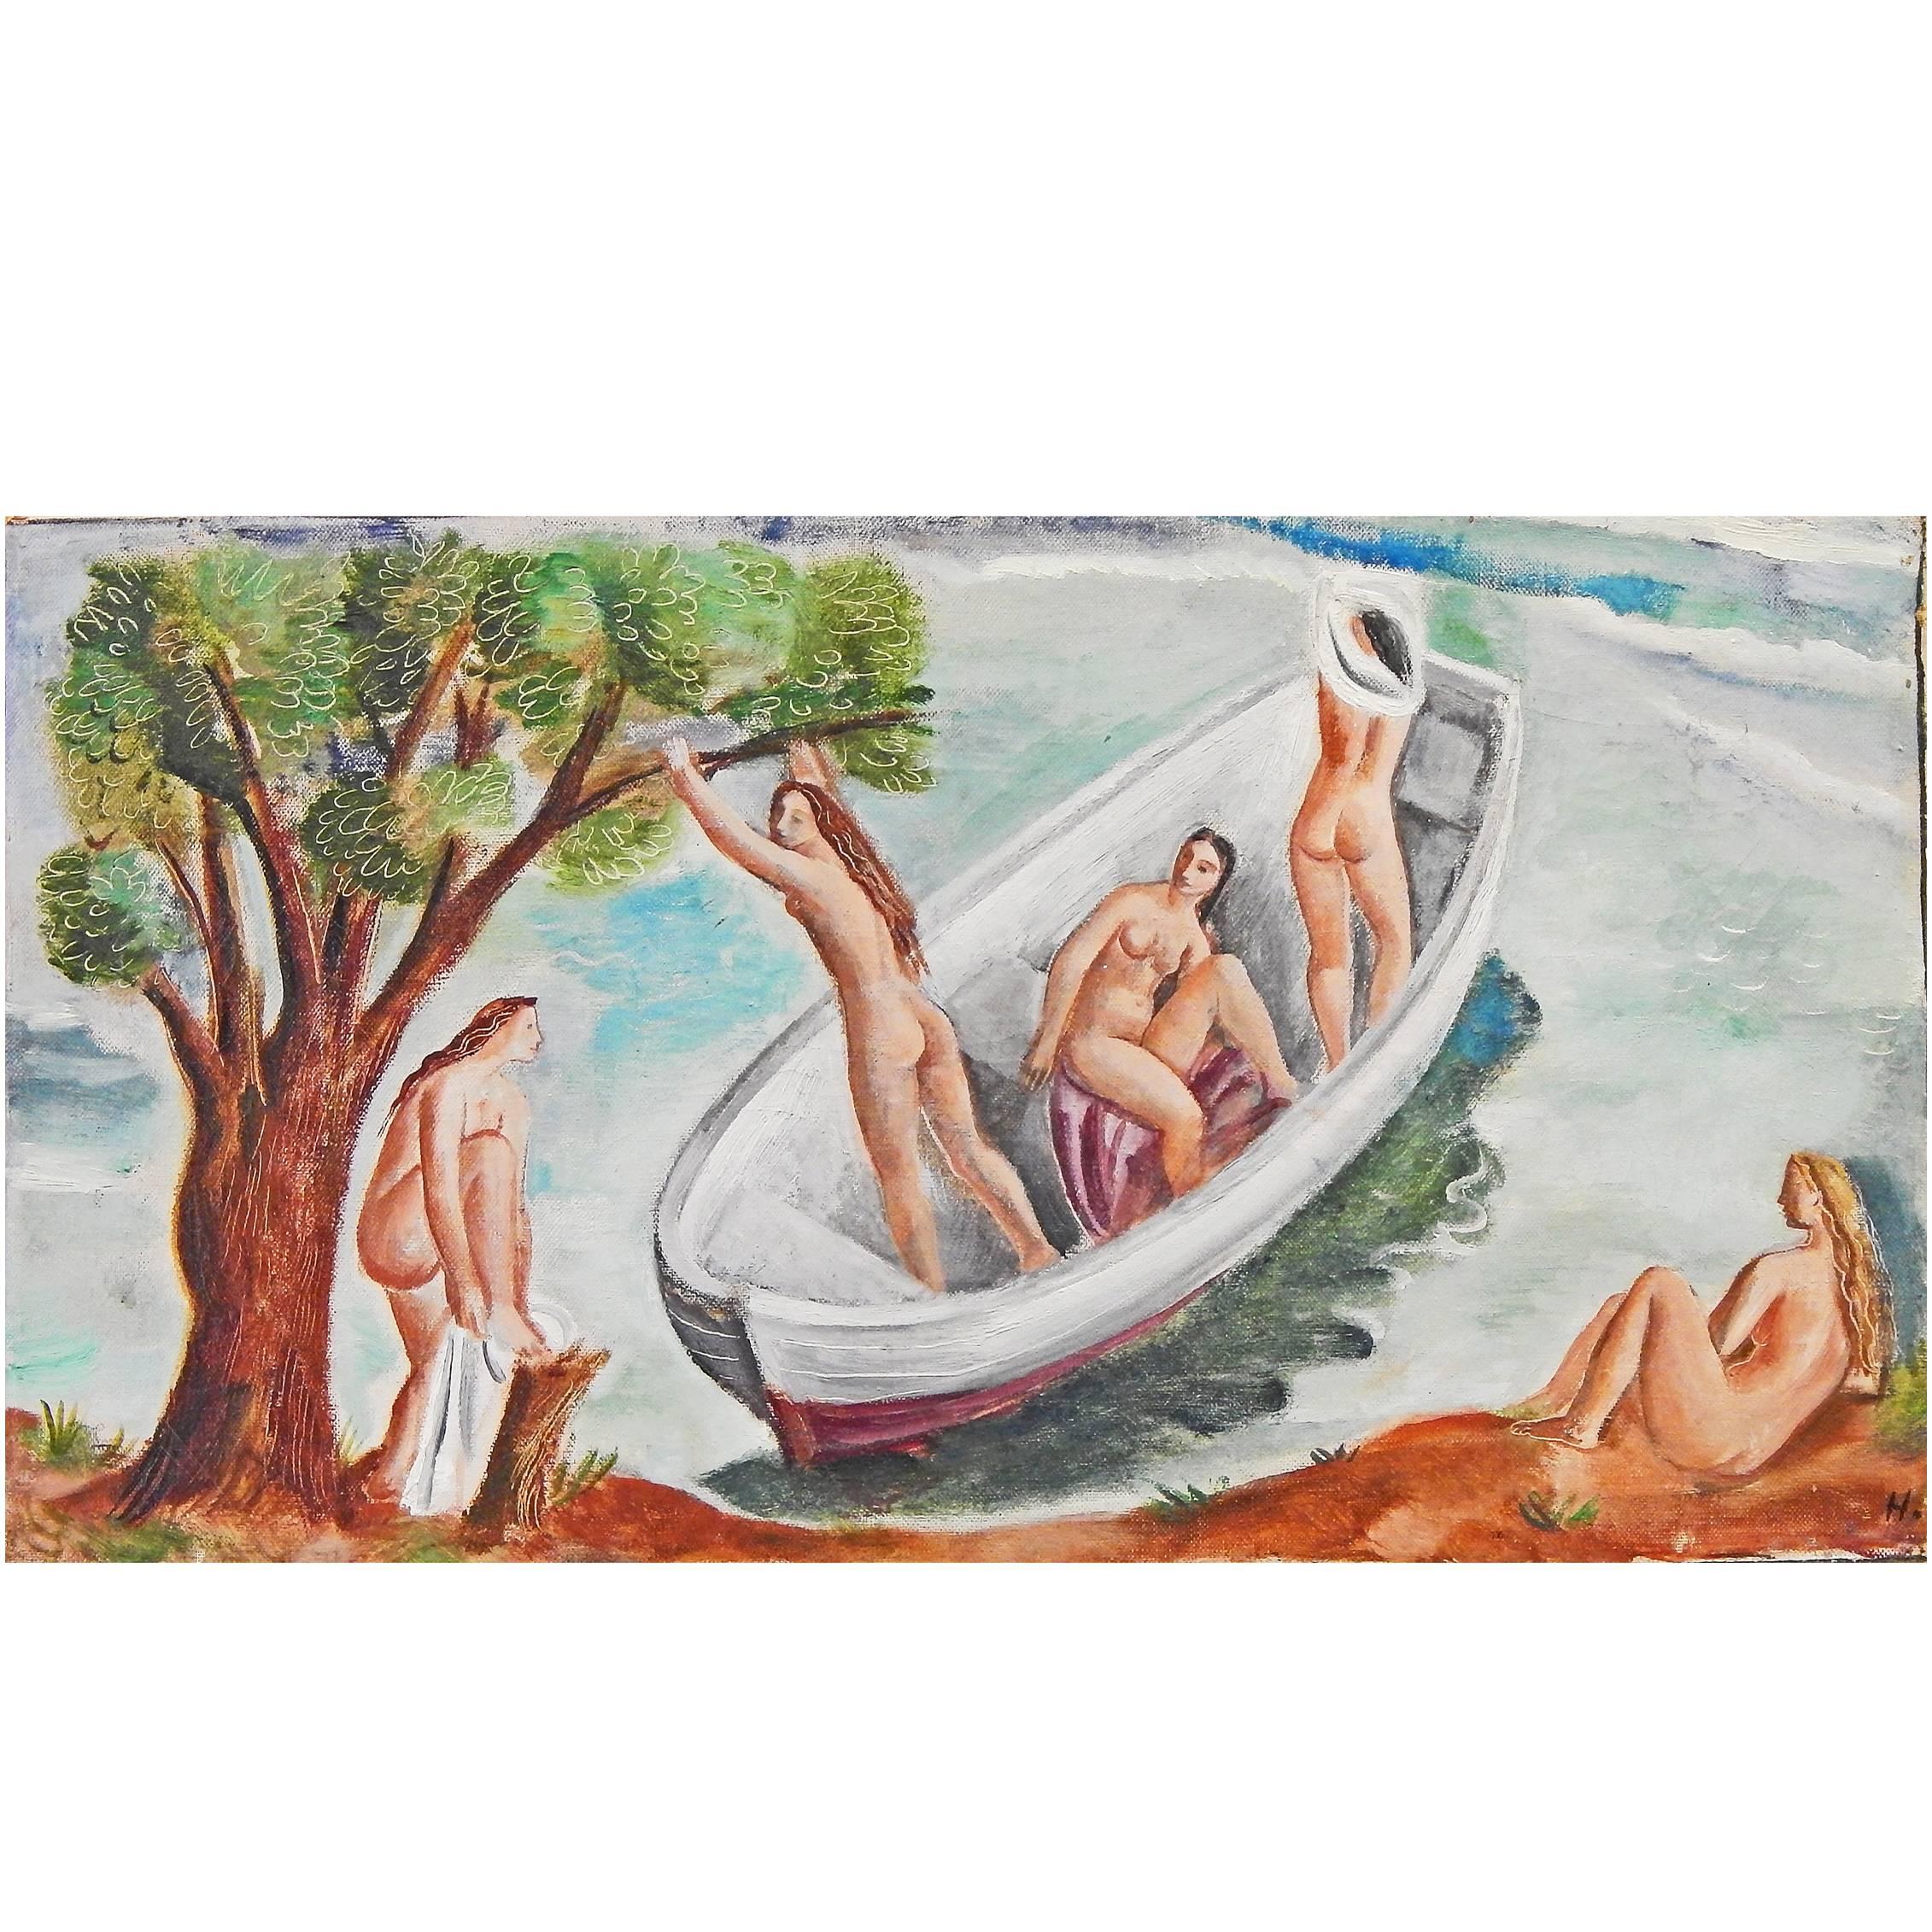 "Bathers at the Shore, " Delightful Art Deco Painting with Female Nudes